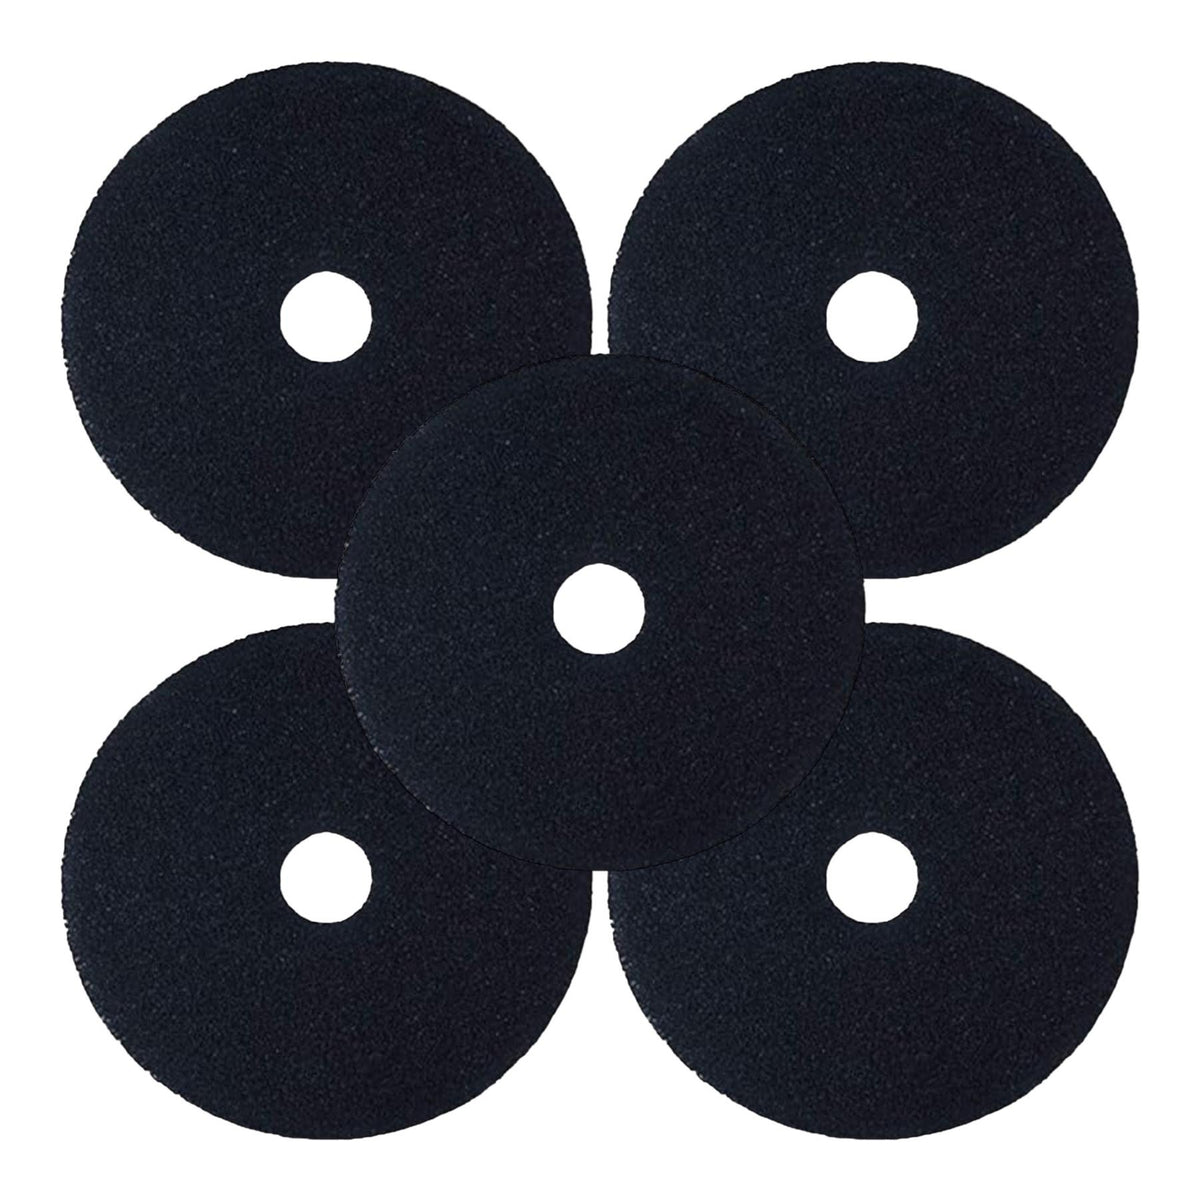 Black Floor Pads Pack of 5 16 inch Pads For Machine Buffing